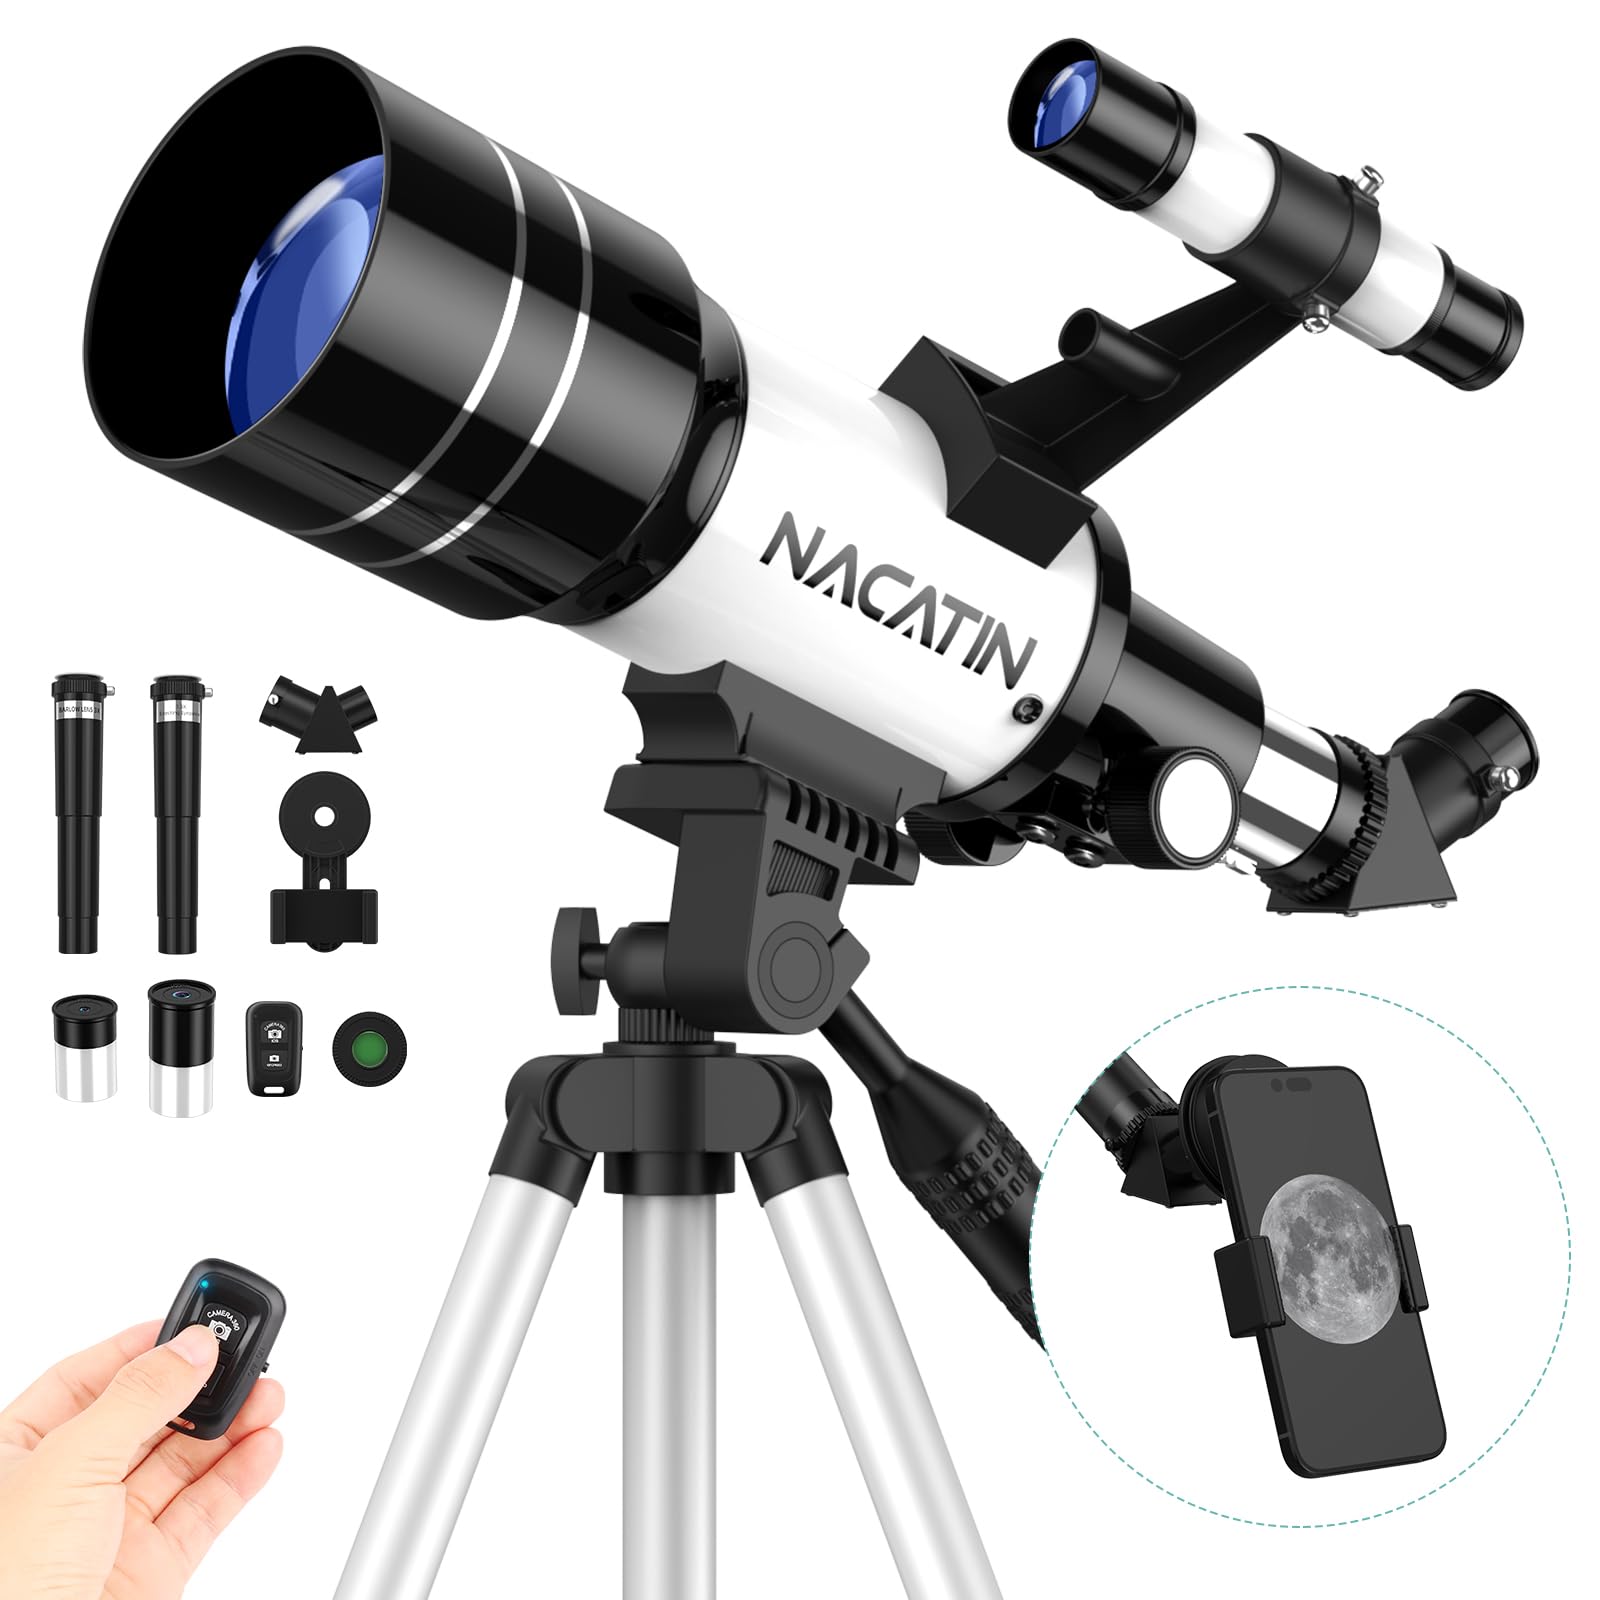 Telescope for Adults & Kids, NACATIN 70mm Aperture (15X-150X) Portable Refractor Telescopes for Astronomy Beginners, 300mm Professional Travel Telescope with A Smartphone Adapter& A Wireless Remote